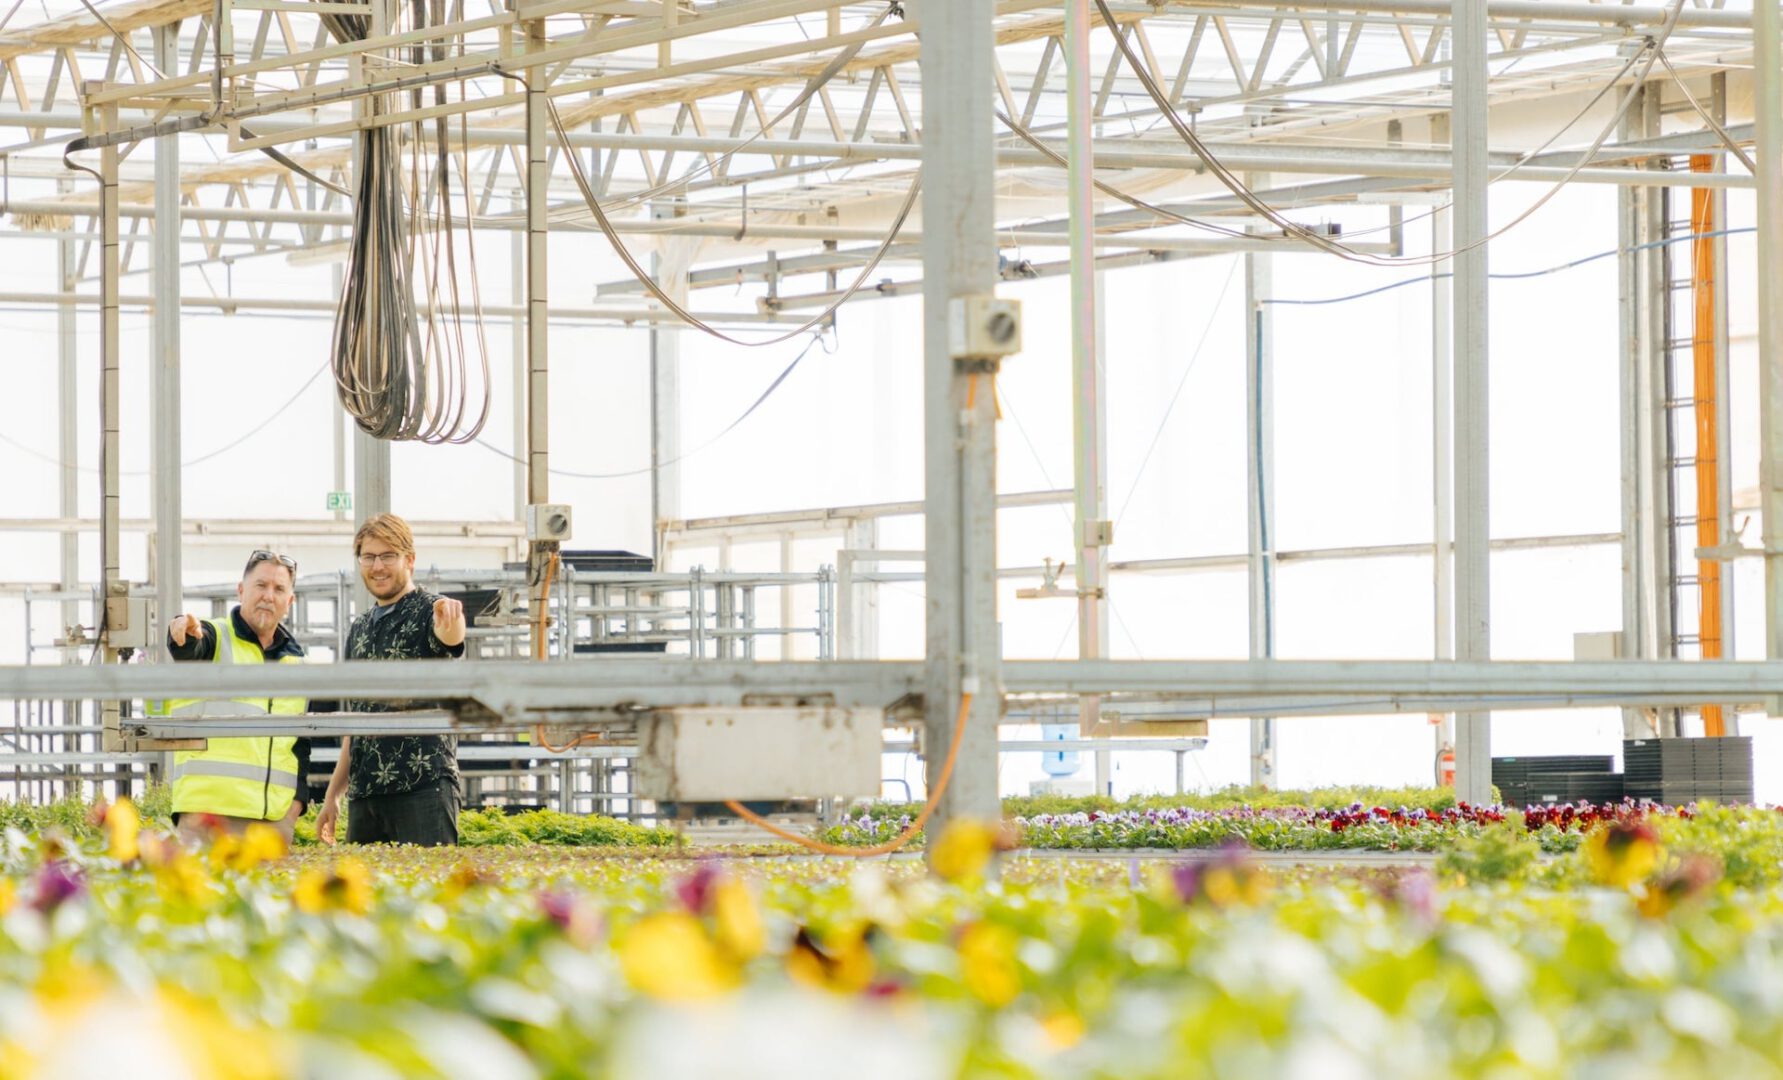 An engineer and employee looking at plants in a greenhouse